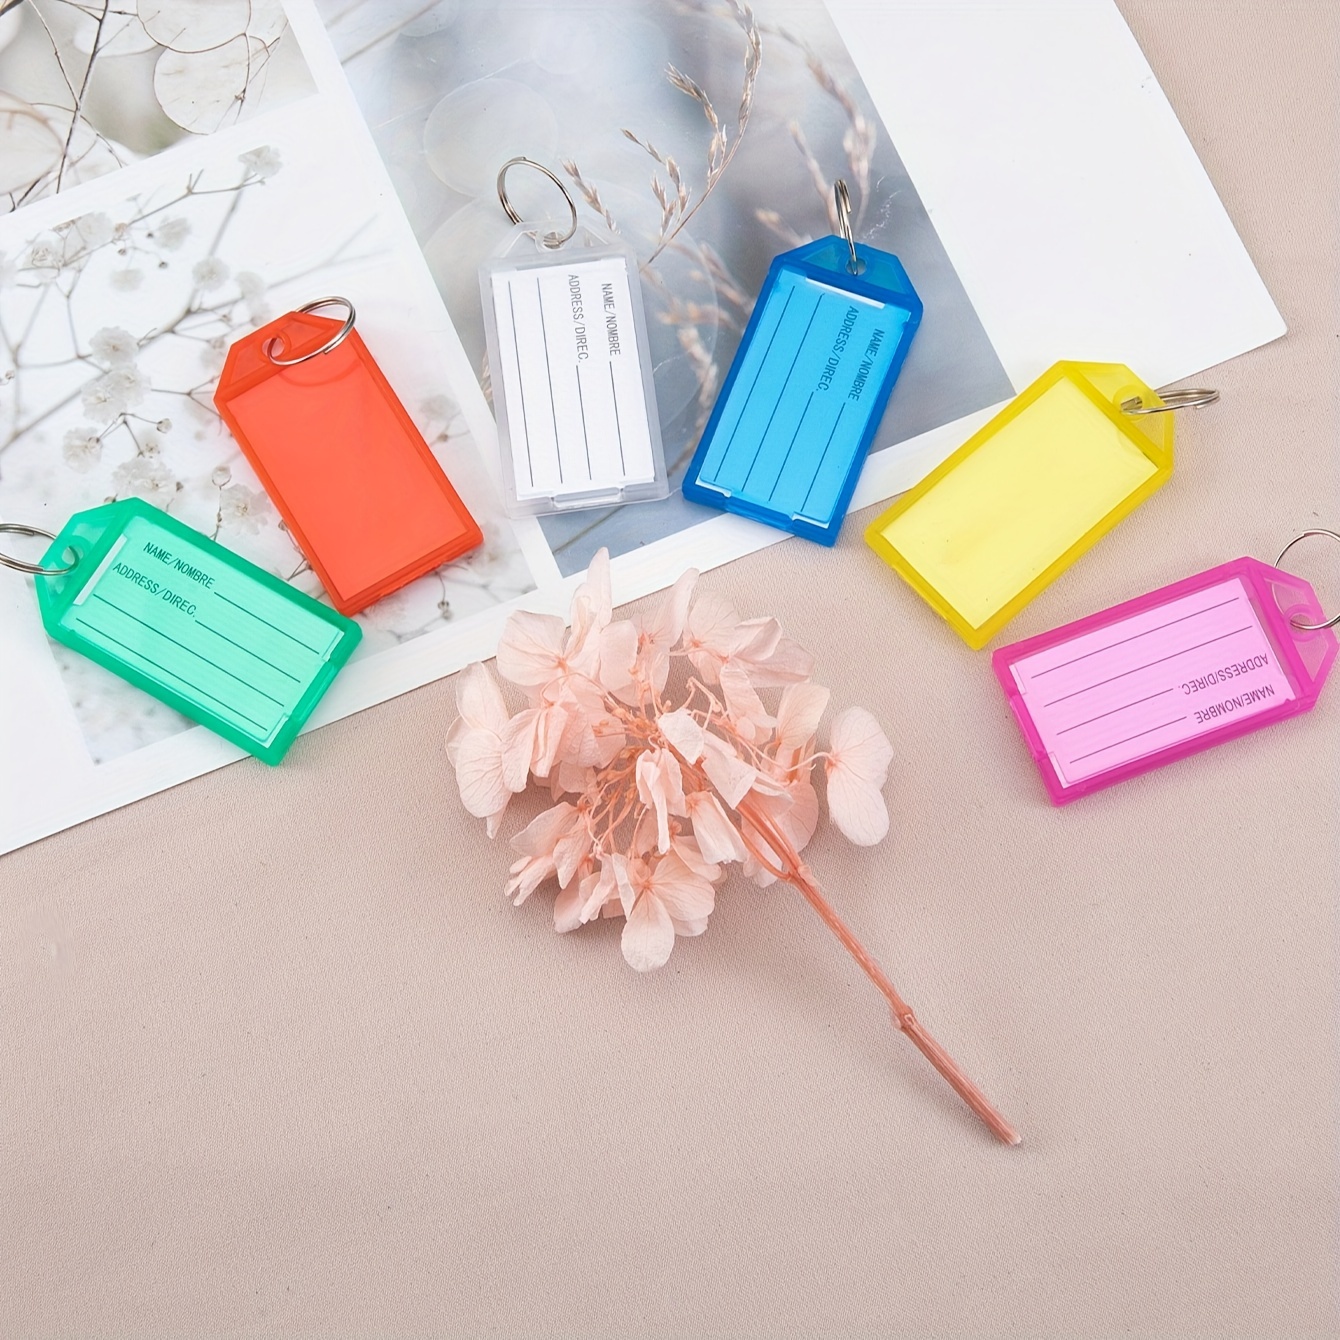 5pcs Colorful Plastic Key Tags Label Numbered Name Baggage Tag Id Label  File Labels Name Tags With Split Ring File Labels Keycha